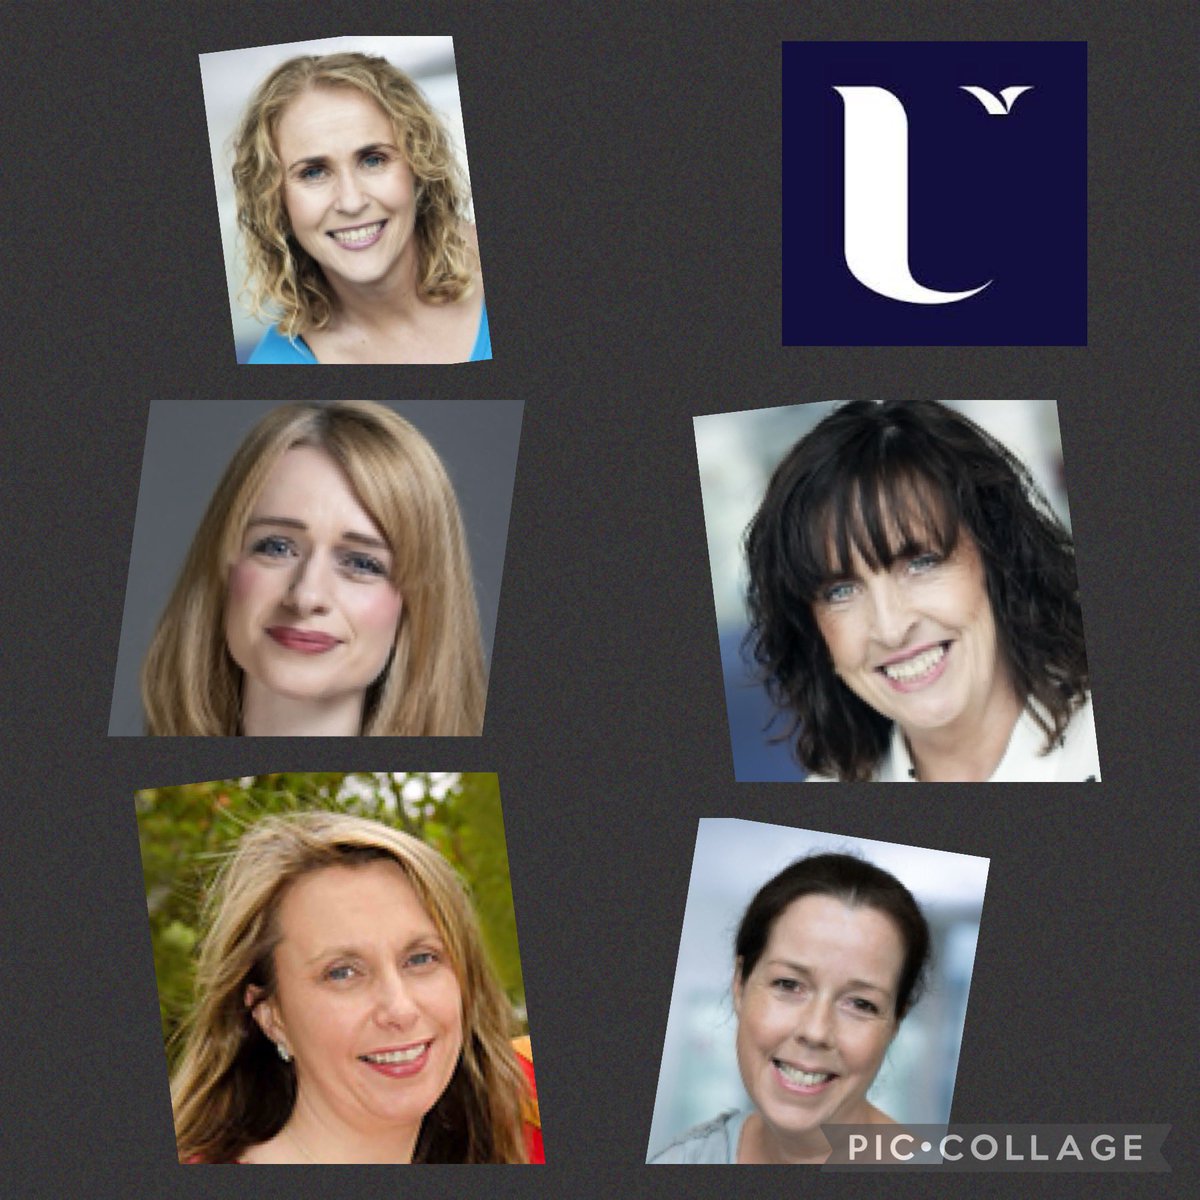 Celebrating five new senior lecturers @UlsterUniSoNP today!! Congratulations and richly deserved @AndreaCShepherd @ClaireMcCauley4 @seanamduggan @ursula_chaney and Dr Esther Beck. We are very #proudofuu #weareuu #ulsternurse #ulsterparamedics